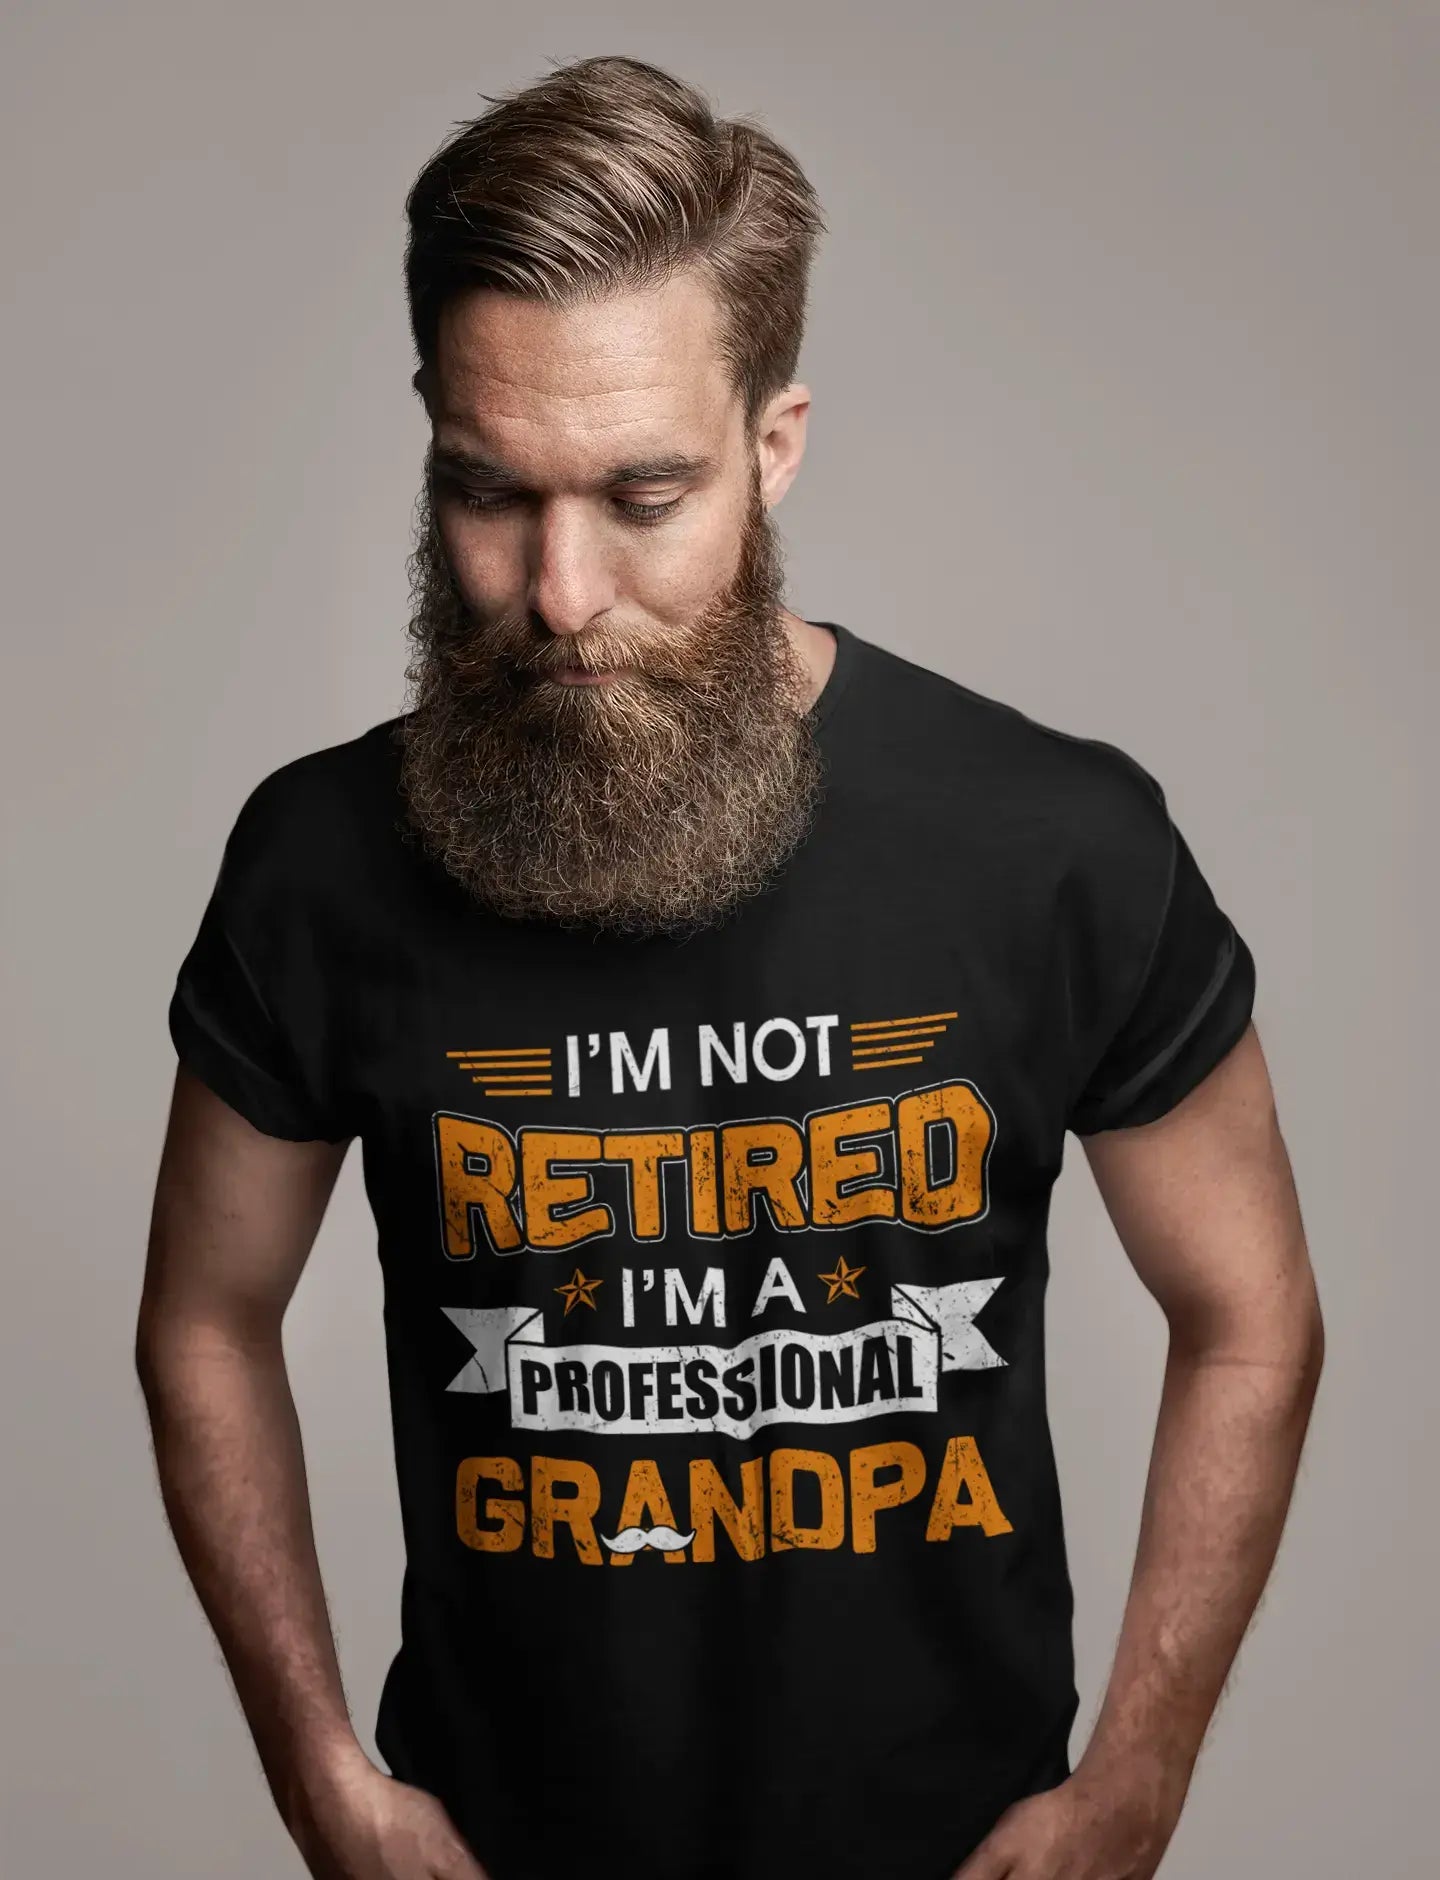 ULTRABASIC Men's Graphic T-Shirt I'm Professional Grandpa - Funny Gift For Father's Day